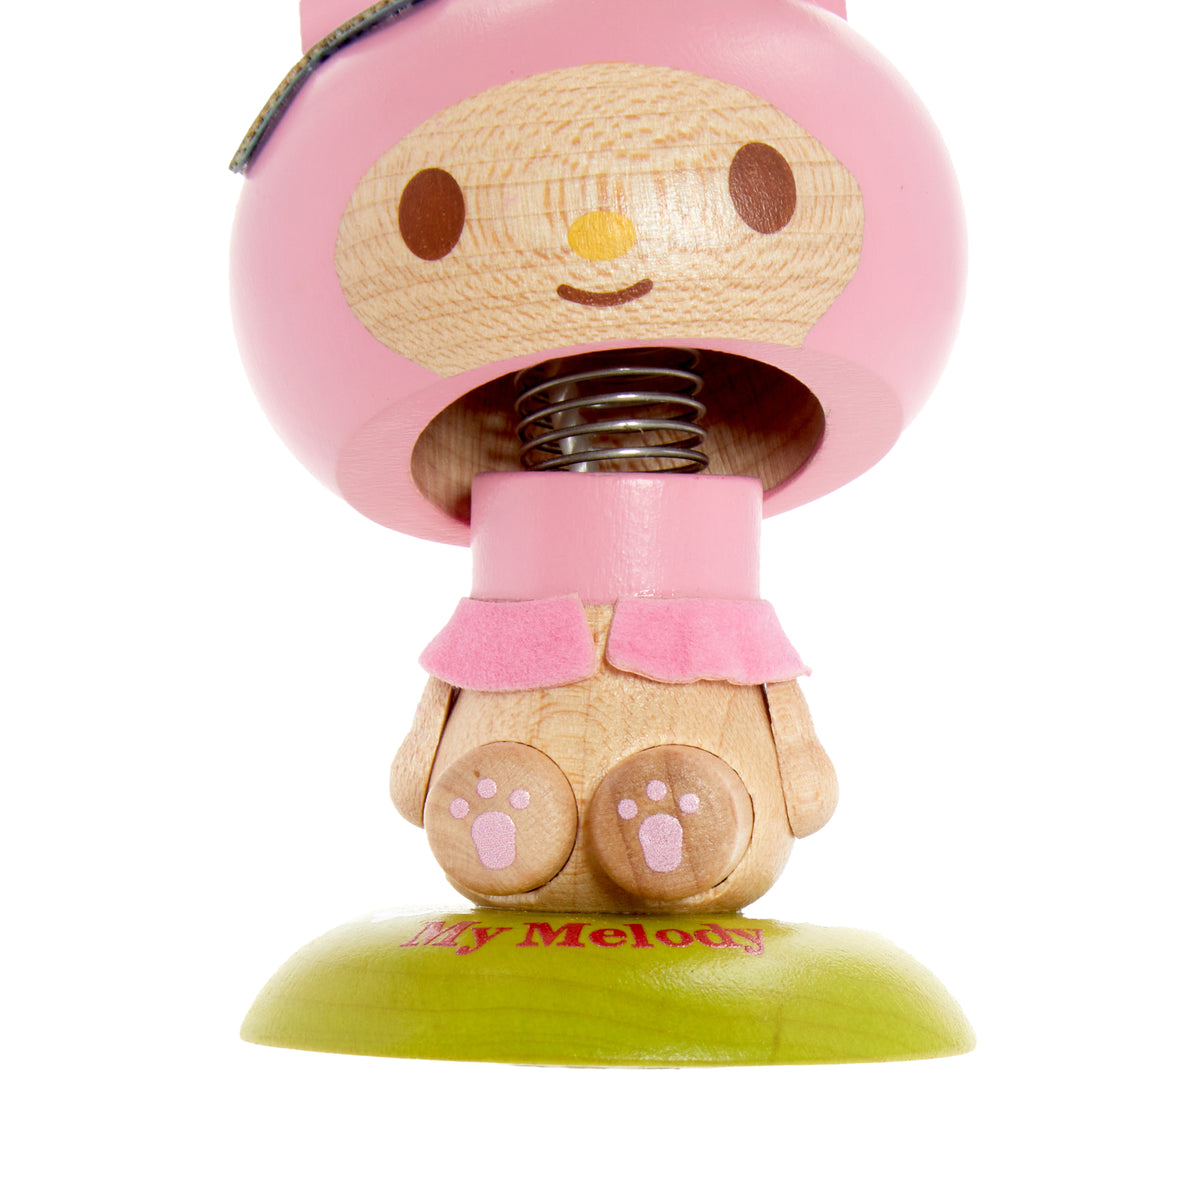 My Melody Wooden Bobblehead Home Goods JEANCO   